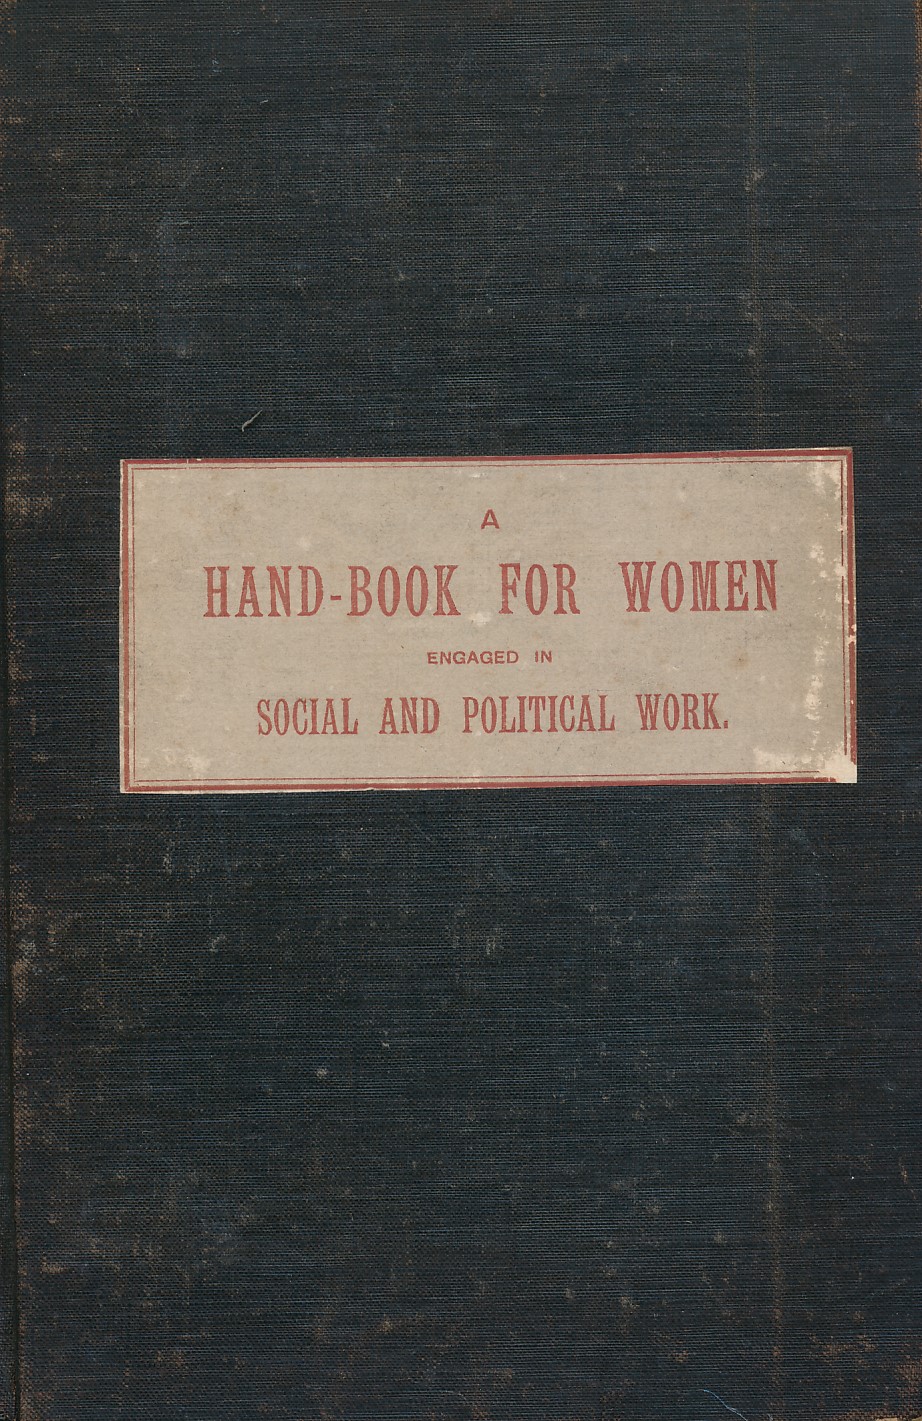 A Hand-Book for Women Engaged in Social and Political Work